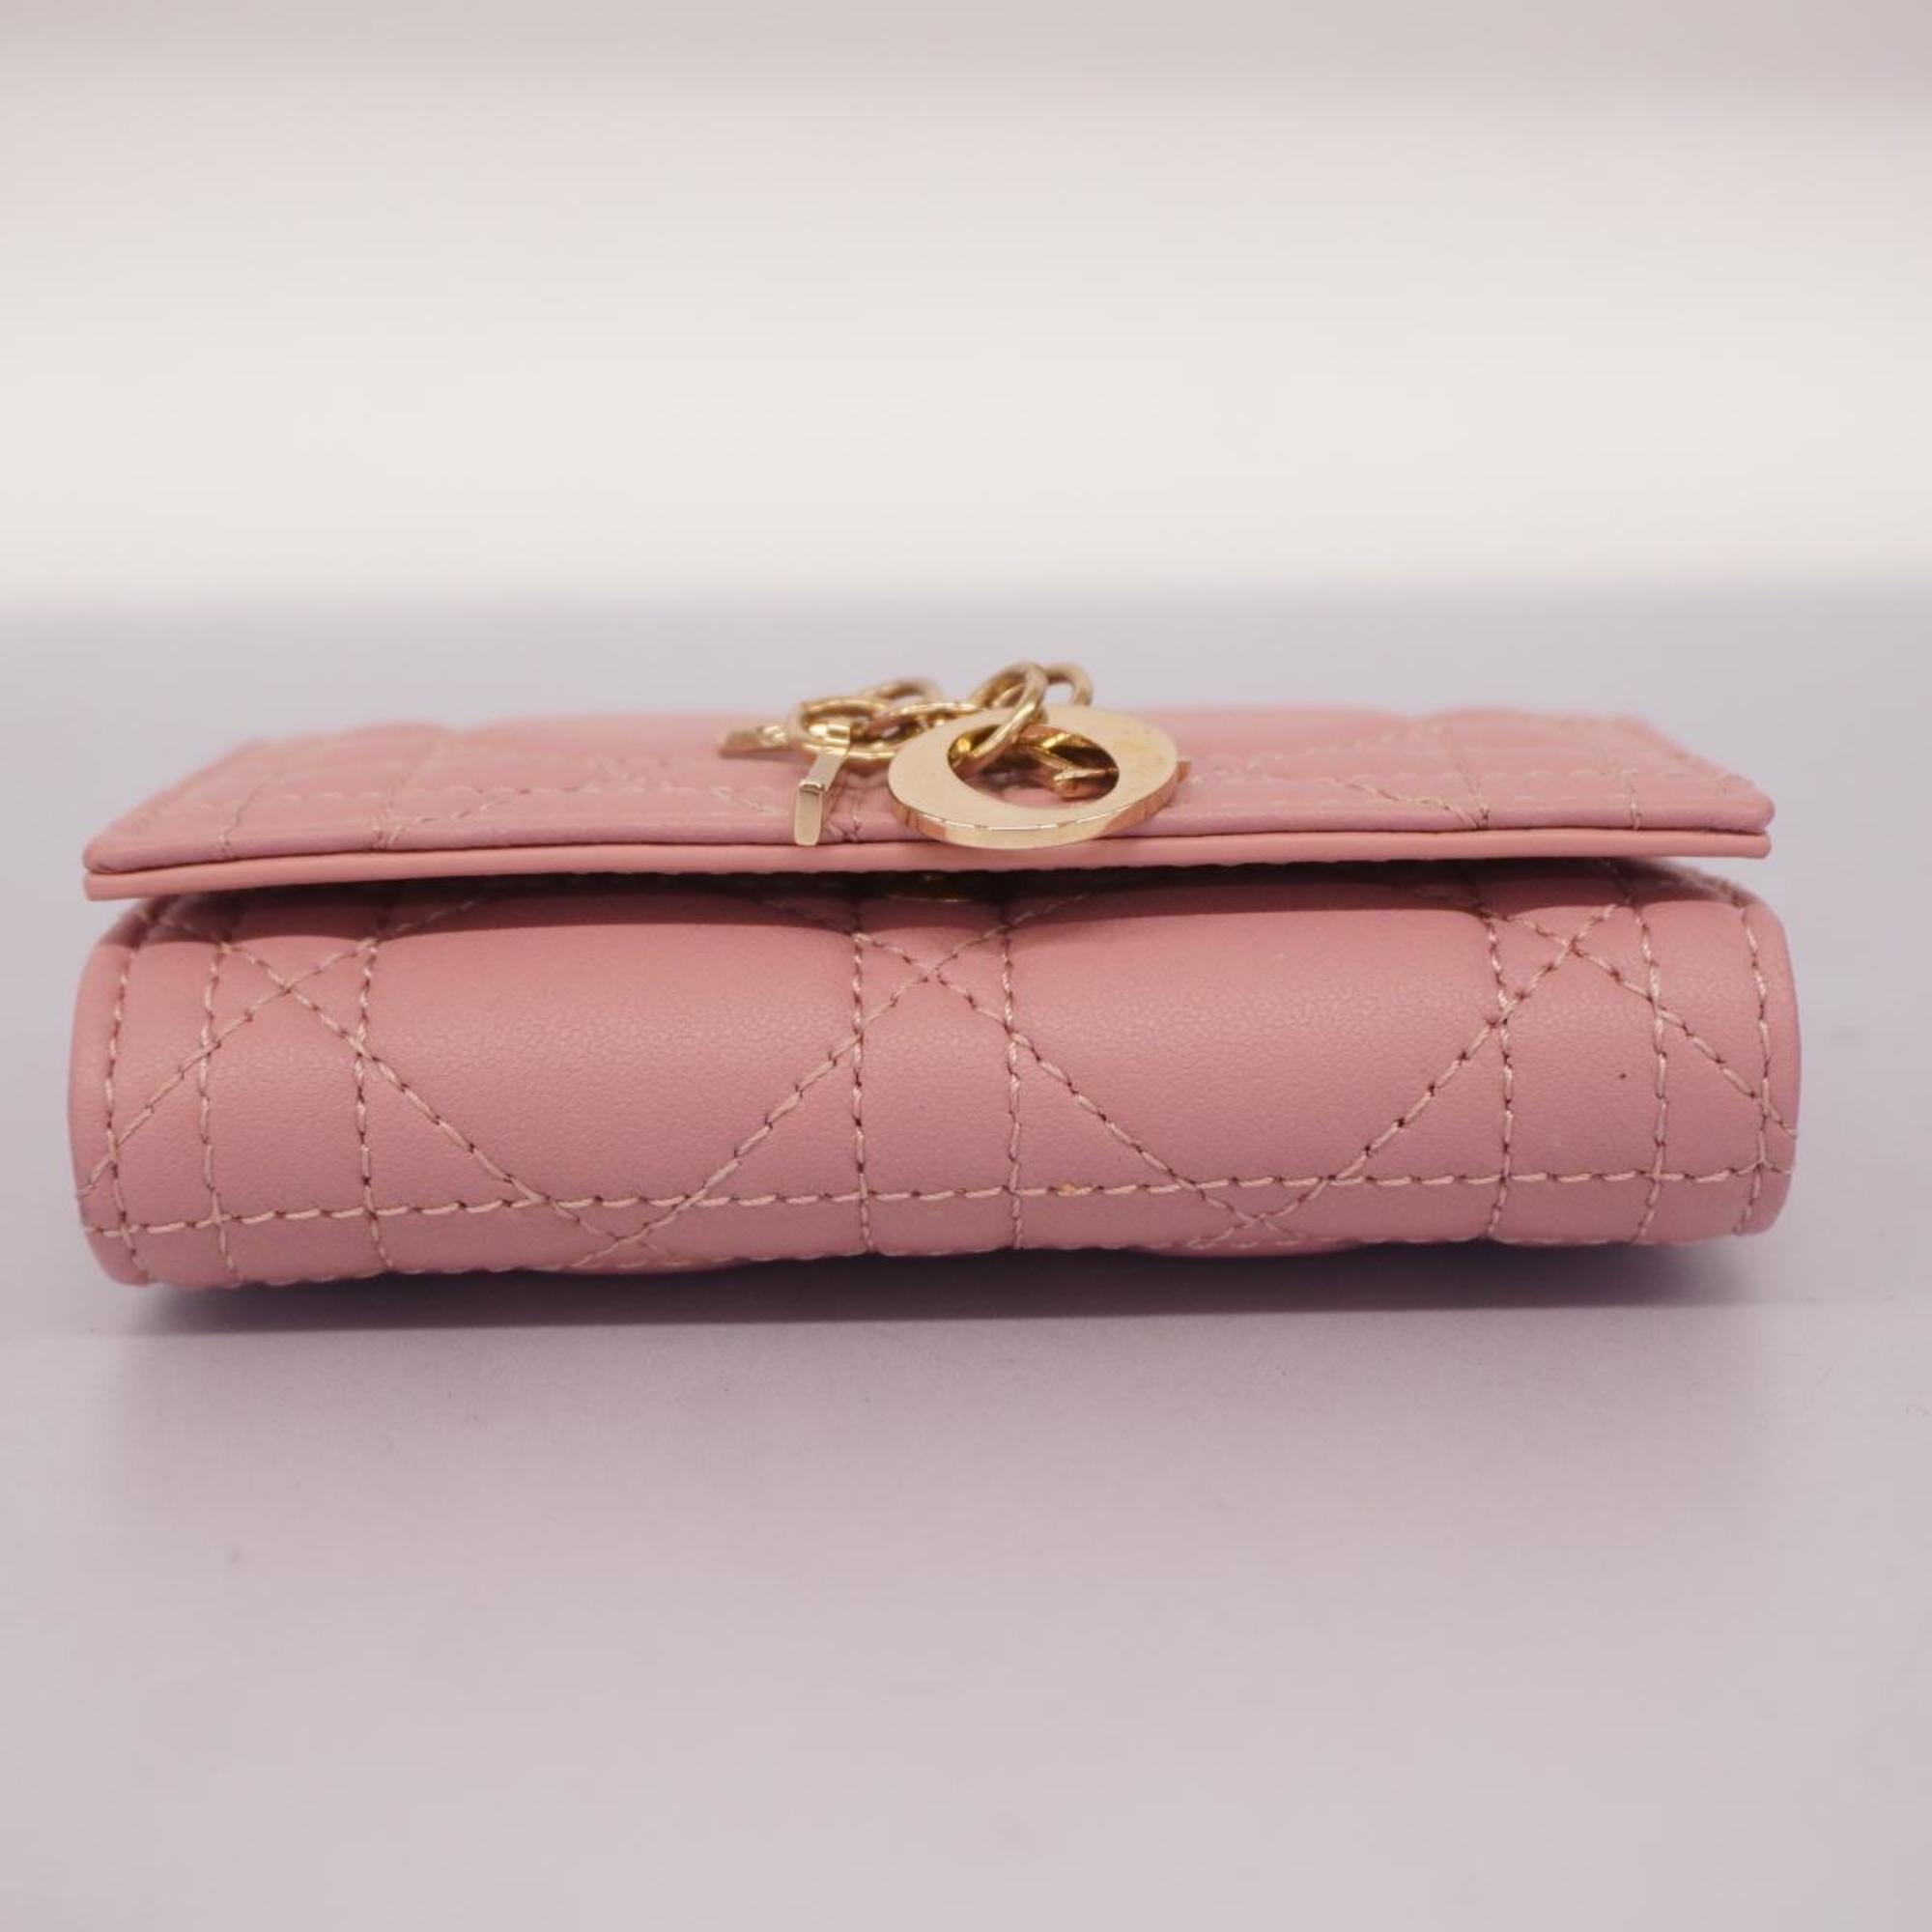 Christian Dior Key Case Cannage Leather Pink Champagne Women's